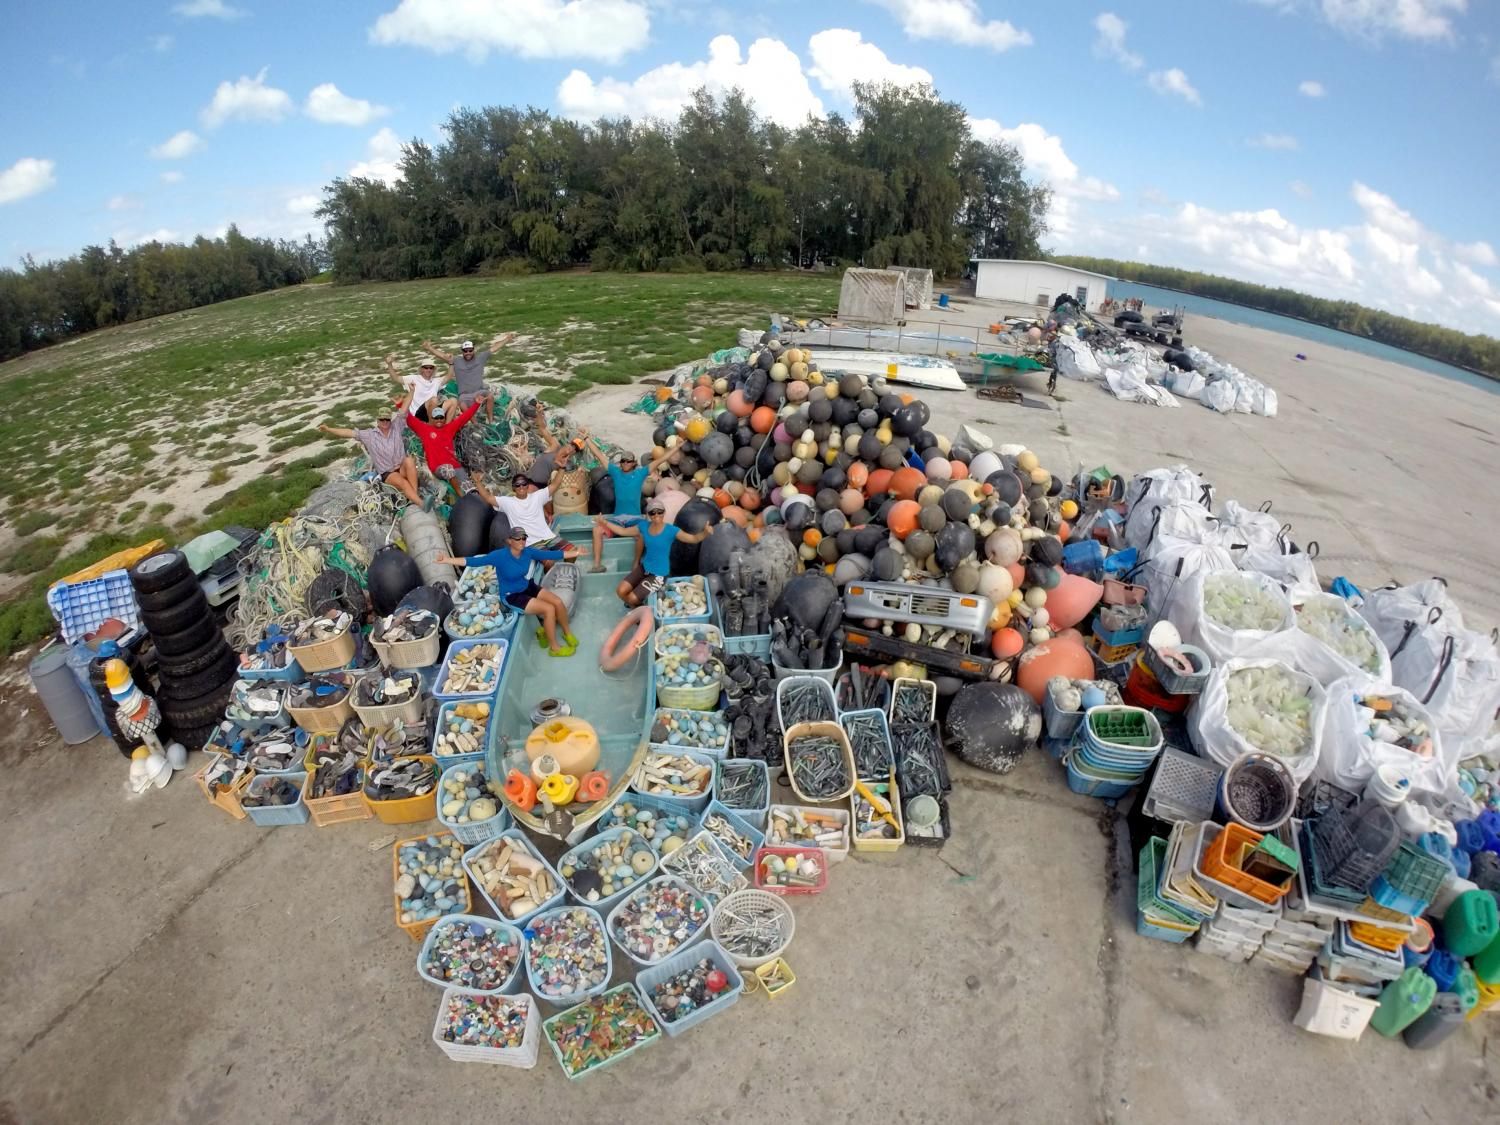 NOAA's Marine Debris team removed 1,268 rubber slippers (flip-flops) and shoes from the shorelines of Midway Atoll.